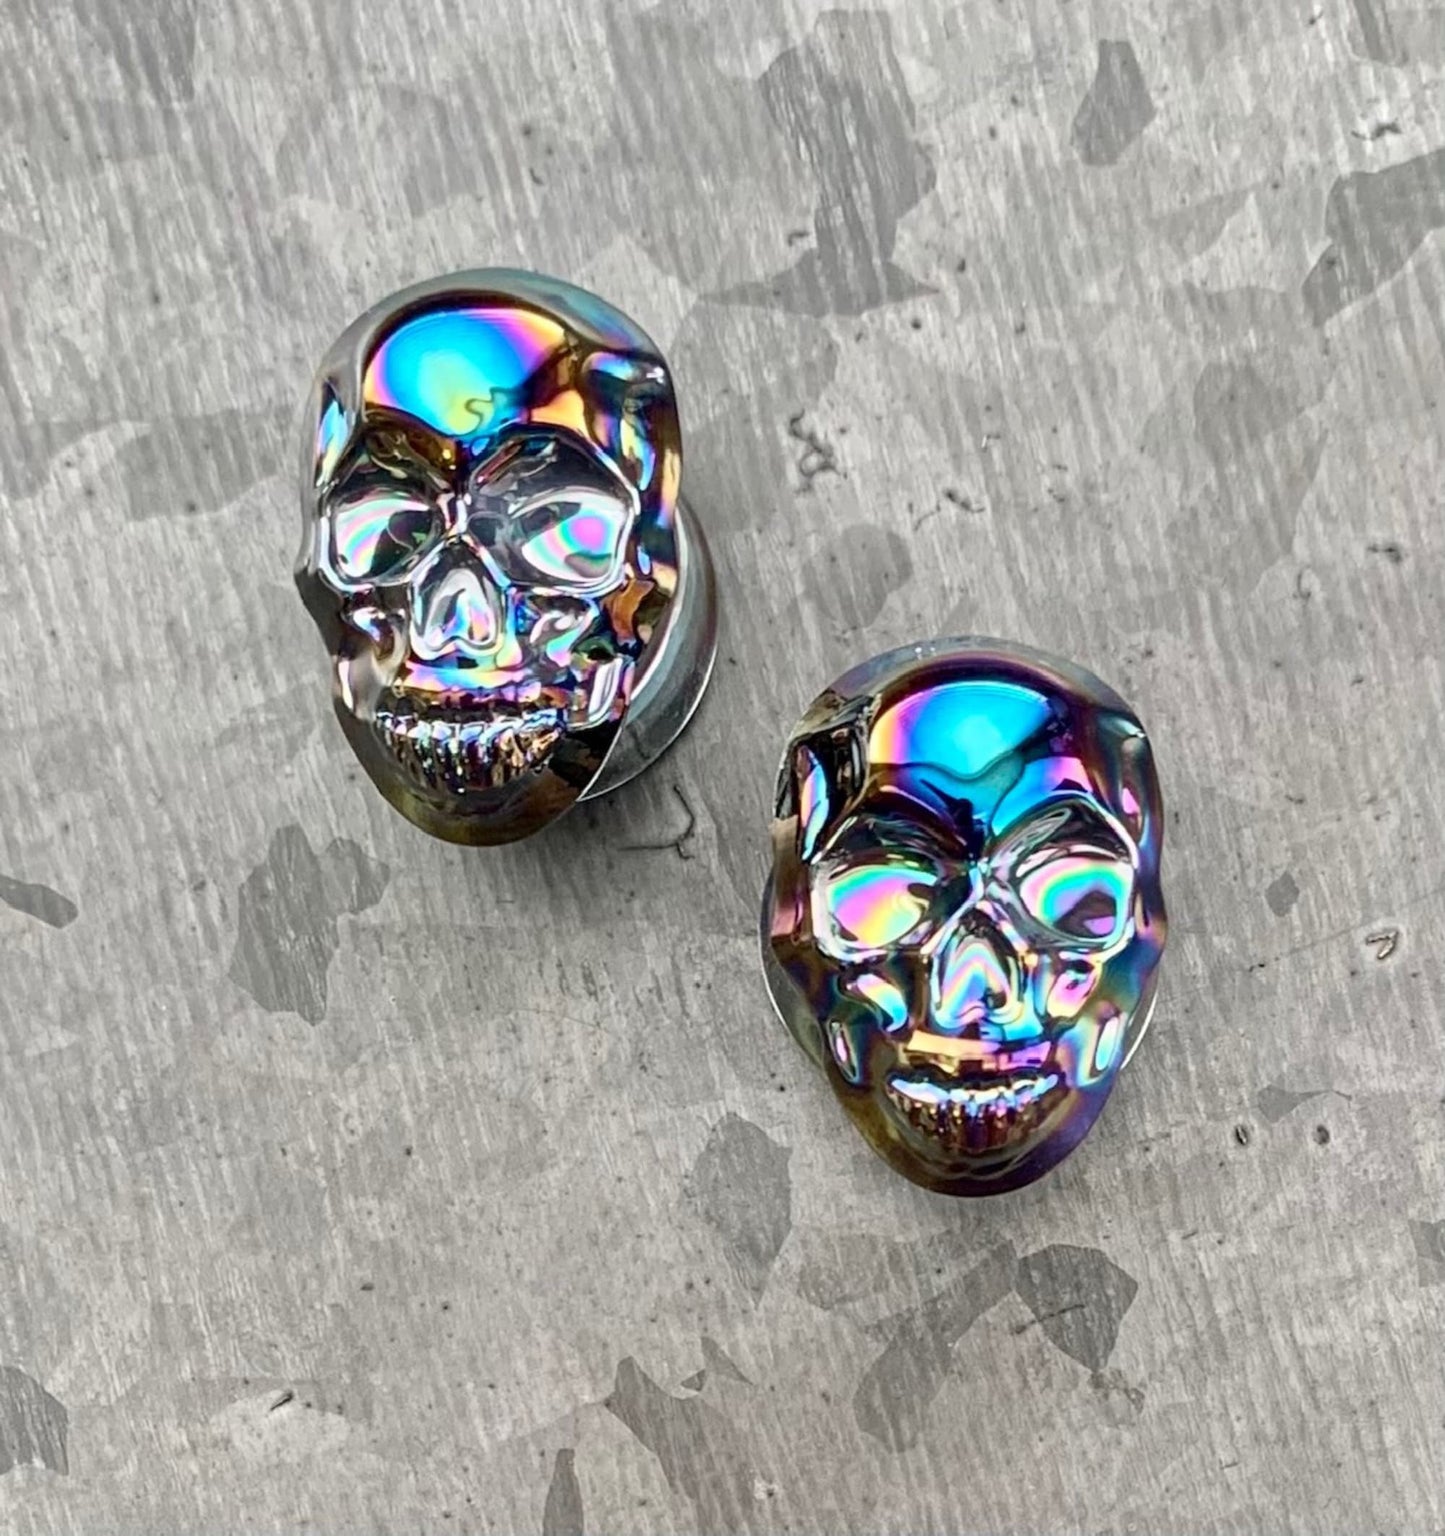 PAIR of Unique Skull Pyrex Glass Double Flare Plugs/Tunnels - Gauges 2g (6mm) through 5/8" (16mm) available - Choose multi-color or black!